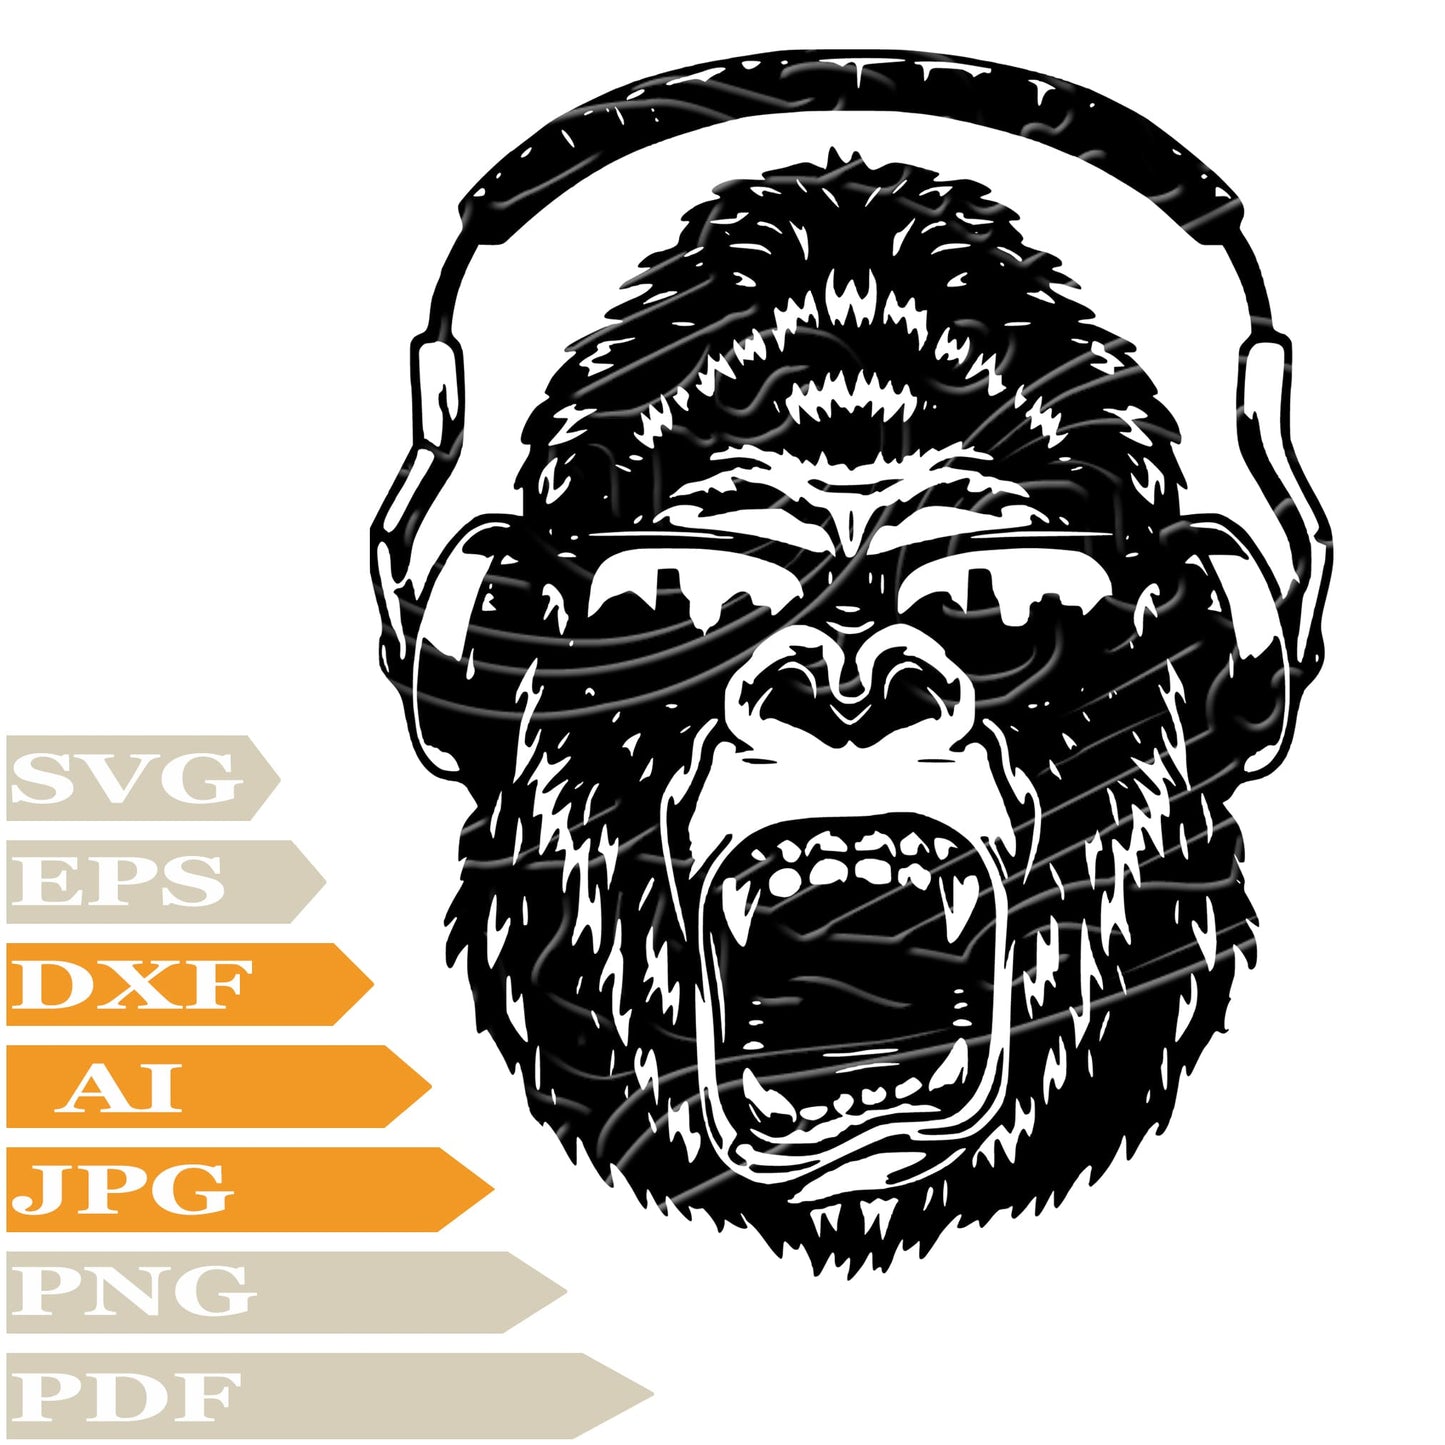 Monkey, Monkey with Headphones Svg File, Image Cut, Png, For Tattoo, Silhouette, Digital Vector Download, Cut File, Clipart, For Cricut